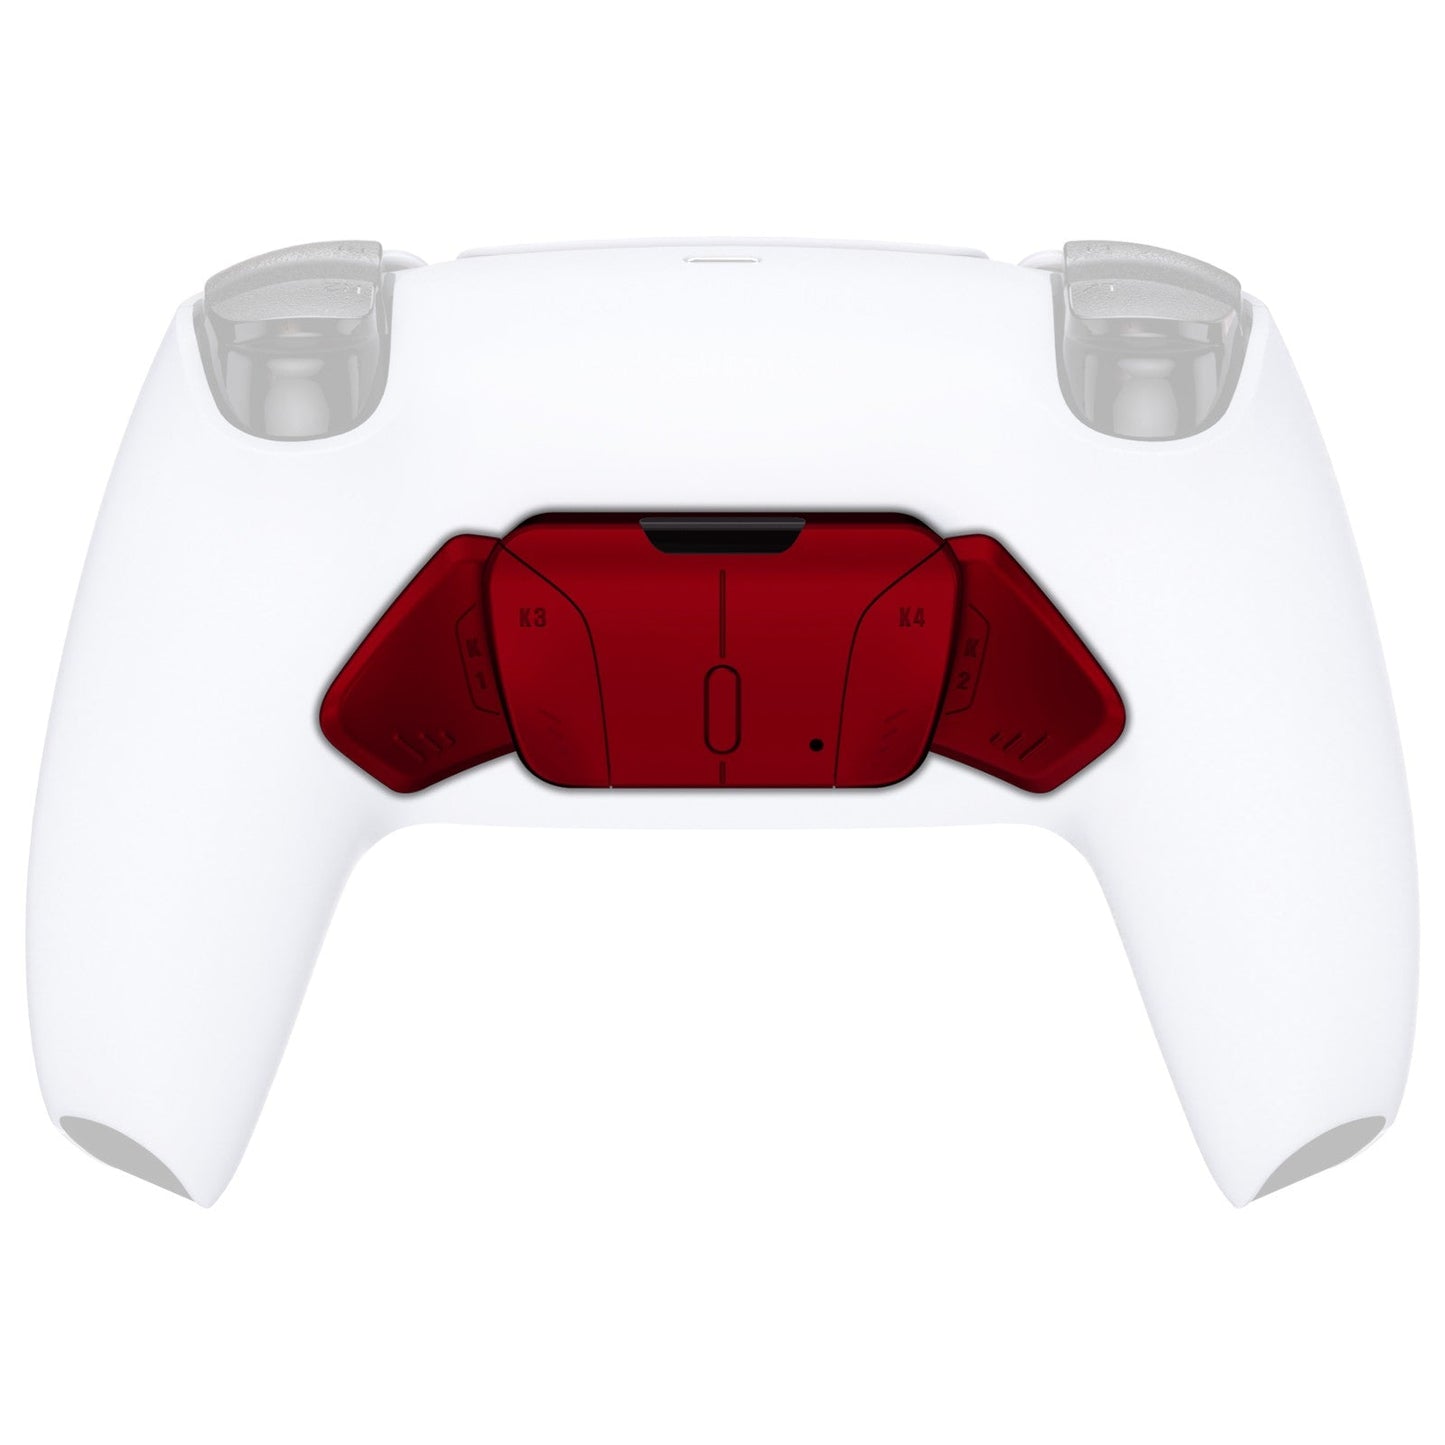 eXtremeRate Retail Turn RISE to RISE4 Kit-Redesigned Scarlet Red K1 K2 K3 K4 Back Buttons Housing & Remap PCB Board for ps5 Controller eXtremeRate RISE & RISE4 Remap kit - Controller & Other RISE Accessories NOT Included - VPFP3002P